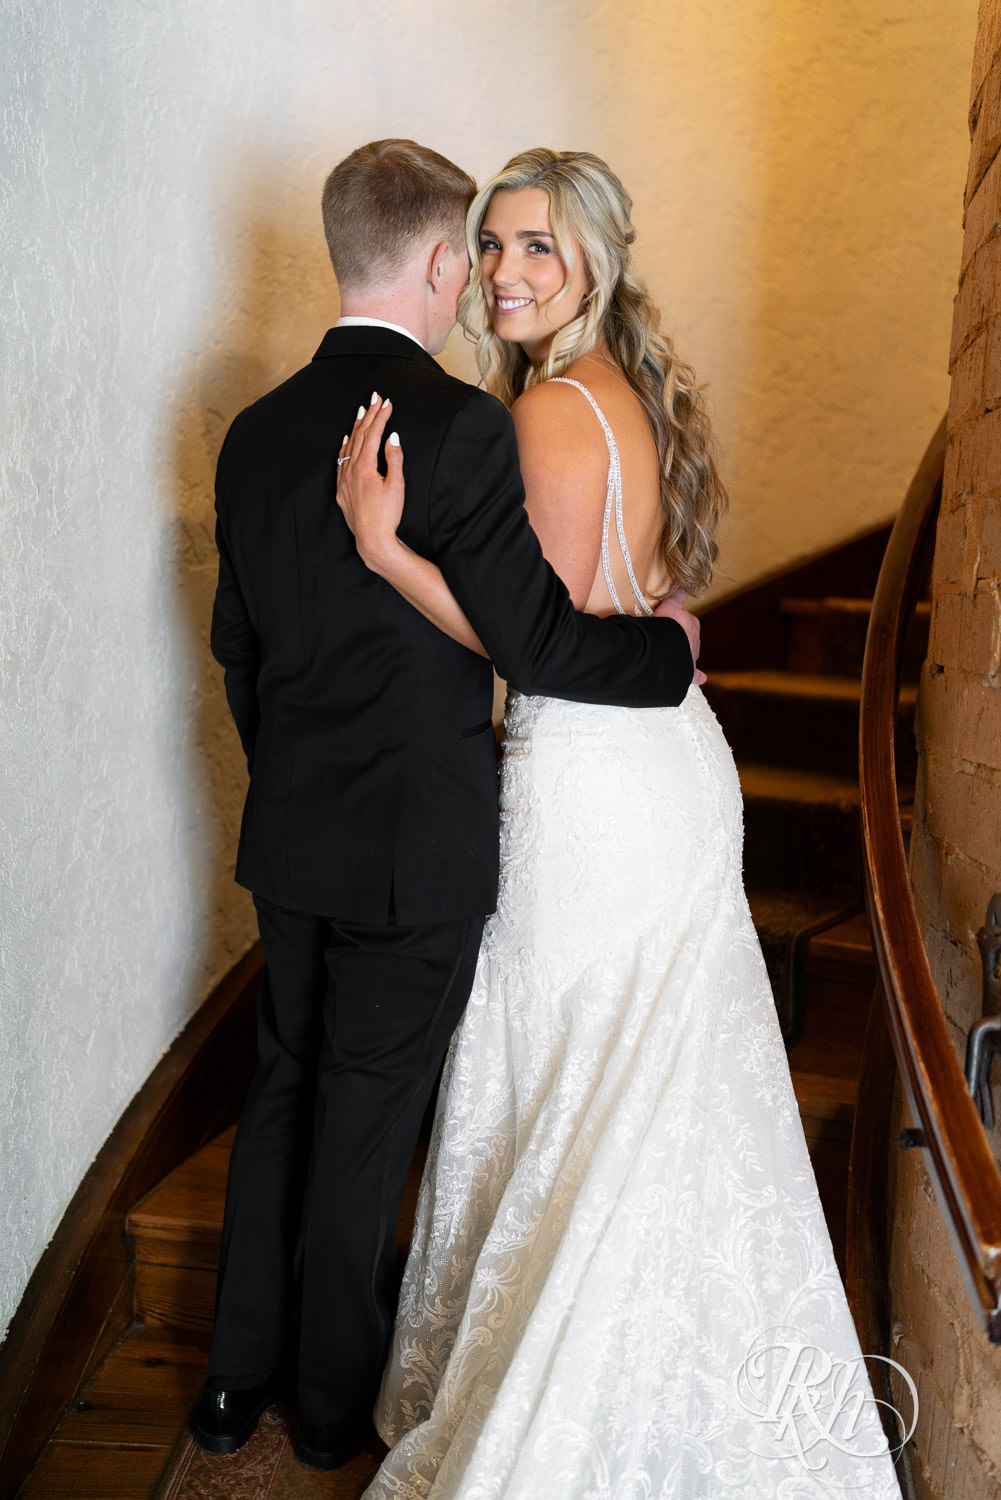 Bride and groom smile on the stairs on wedding day at Bavaria Downs in Chaska, Minnesota.